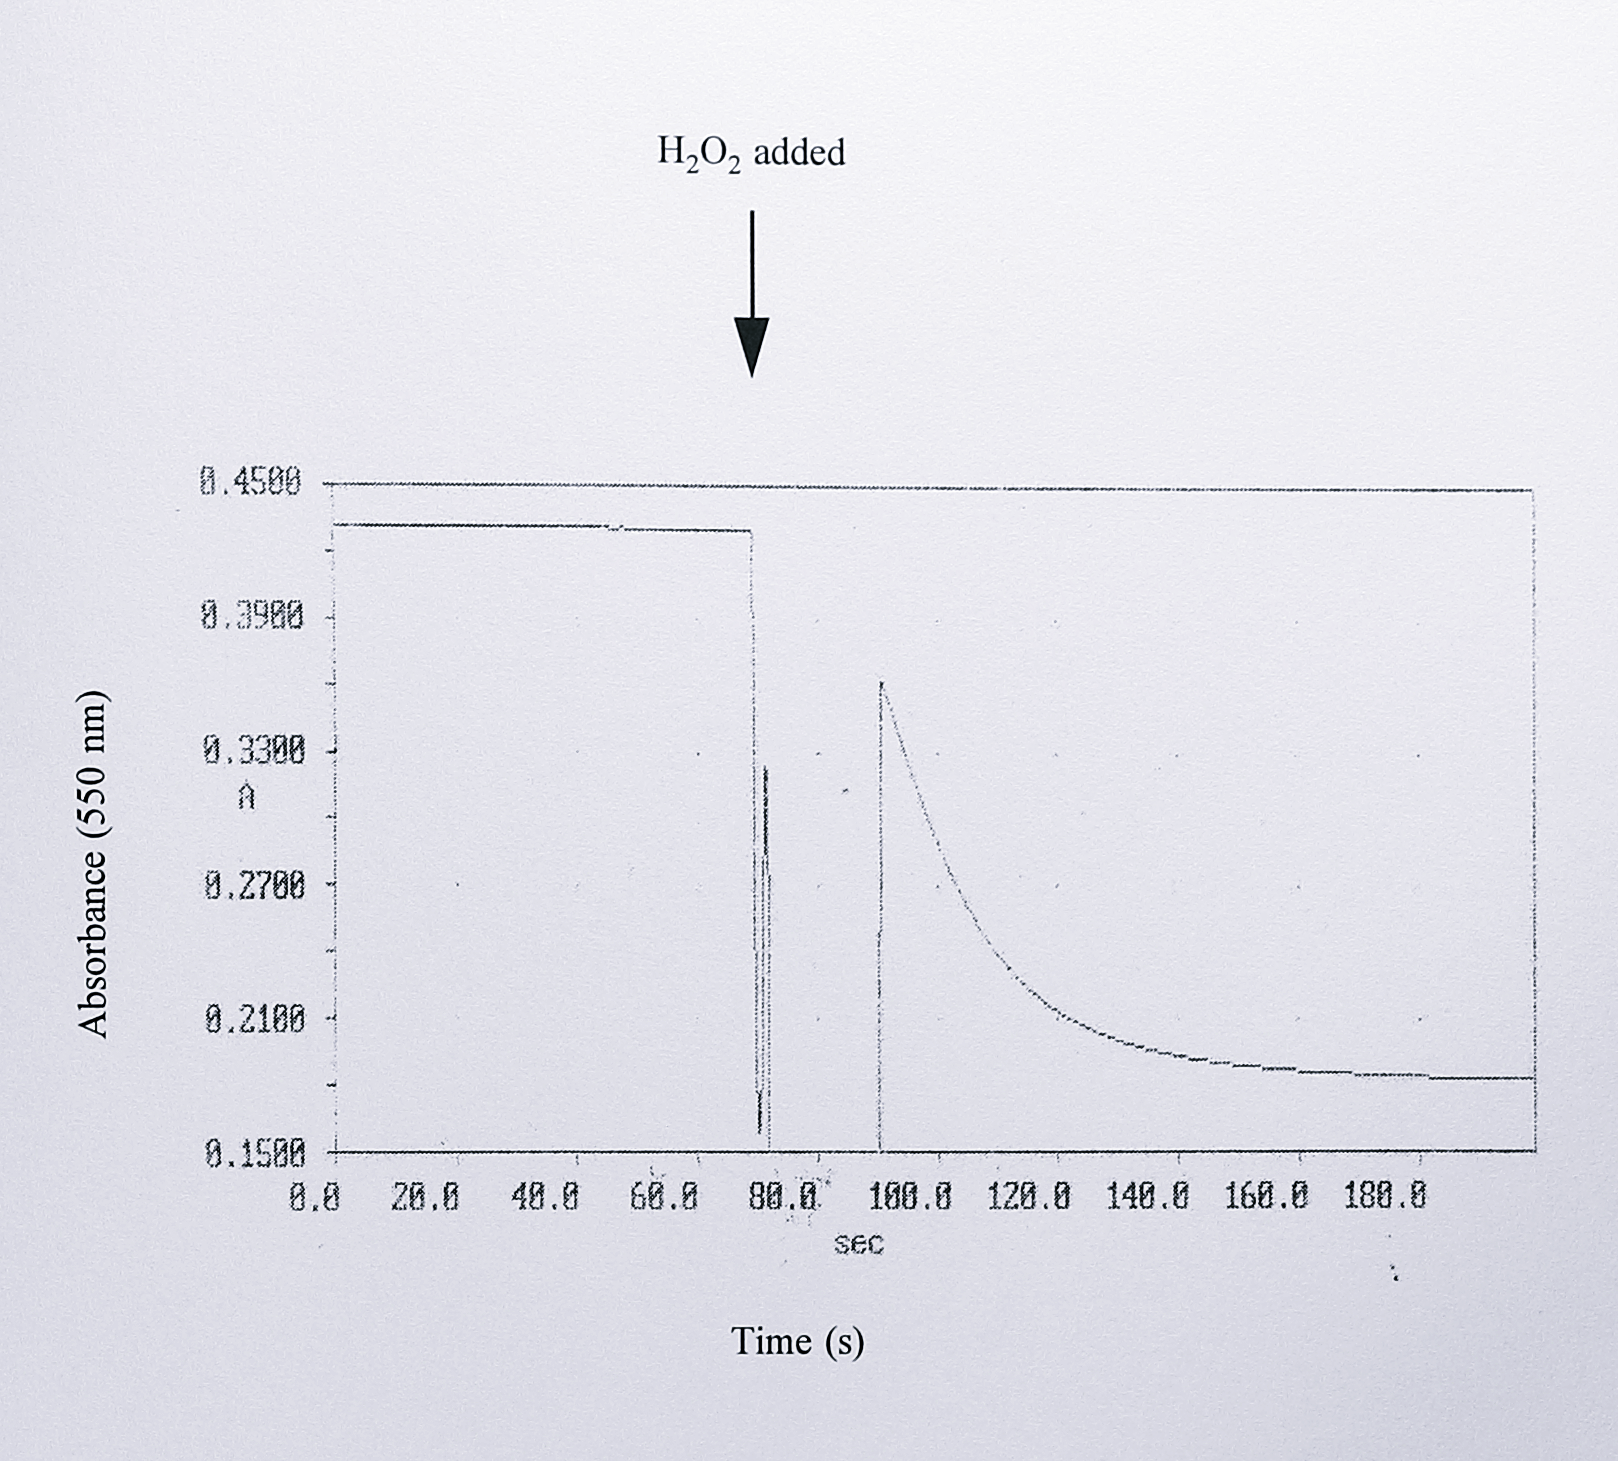 Assay of cytochrome _c_ peroxidase activity in peak 4 following ion exchange chromatography. The assay was performed in a volume of 1 ml, containing 50 mM Tris-HCl pH 8.0, 25 $\mu$M horse heart cytochrome _c_ and varying volumes of the fractions from the top of peak 4. After incubation of these components for 1 minute to reduce the peroxidase (Gilmour _et al_., 1994), the reaction was initiated by the addition of 18 $\mu$M H$_2$O$_2$. Oxidation of cytochrome _c_ was followed by the decrease in absorbance at 550 nm.